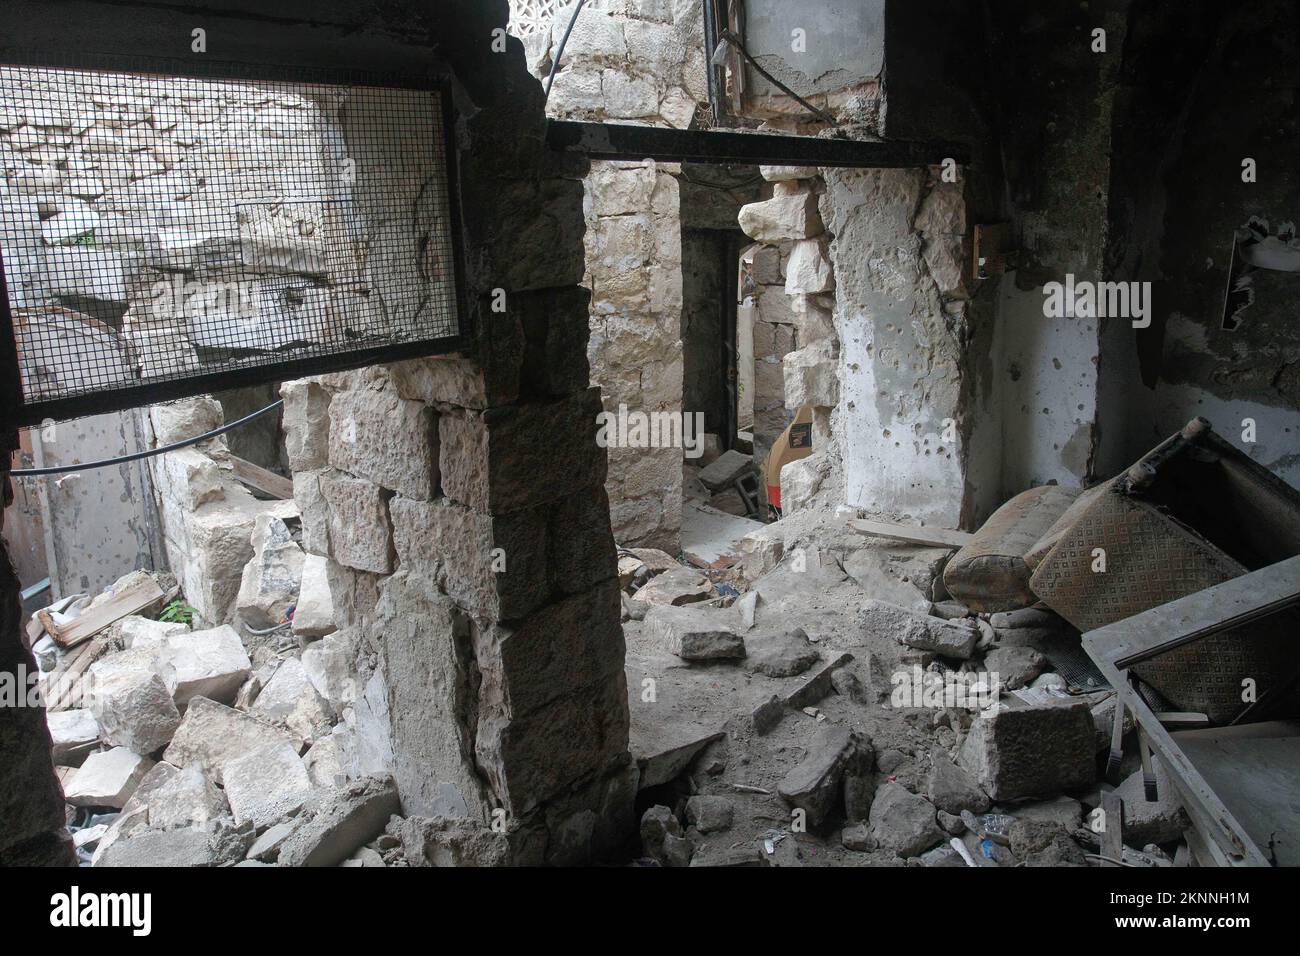 A view of the shelter in which armed Palestinians from the Lions' Den group were hiding in the old city of Nablus in the West Bank. The Israeli army forces destroyed it and assassinated the Palestinian gunmen who were in the shelter during their operation against these groups. Stock Photo